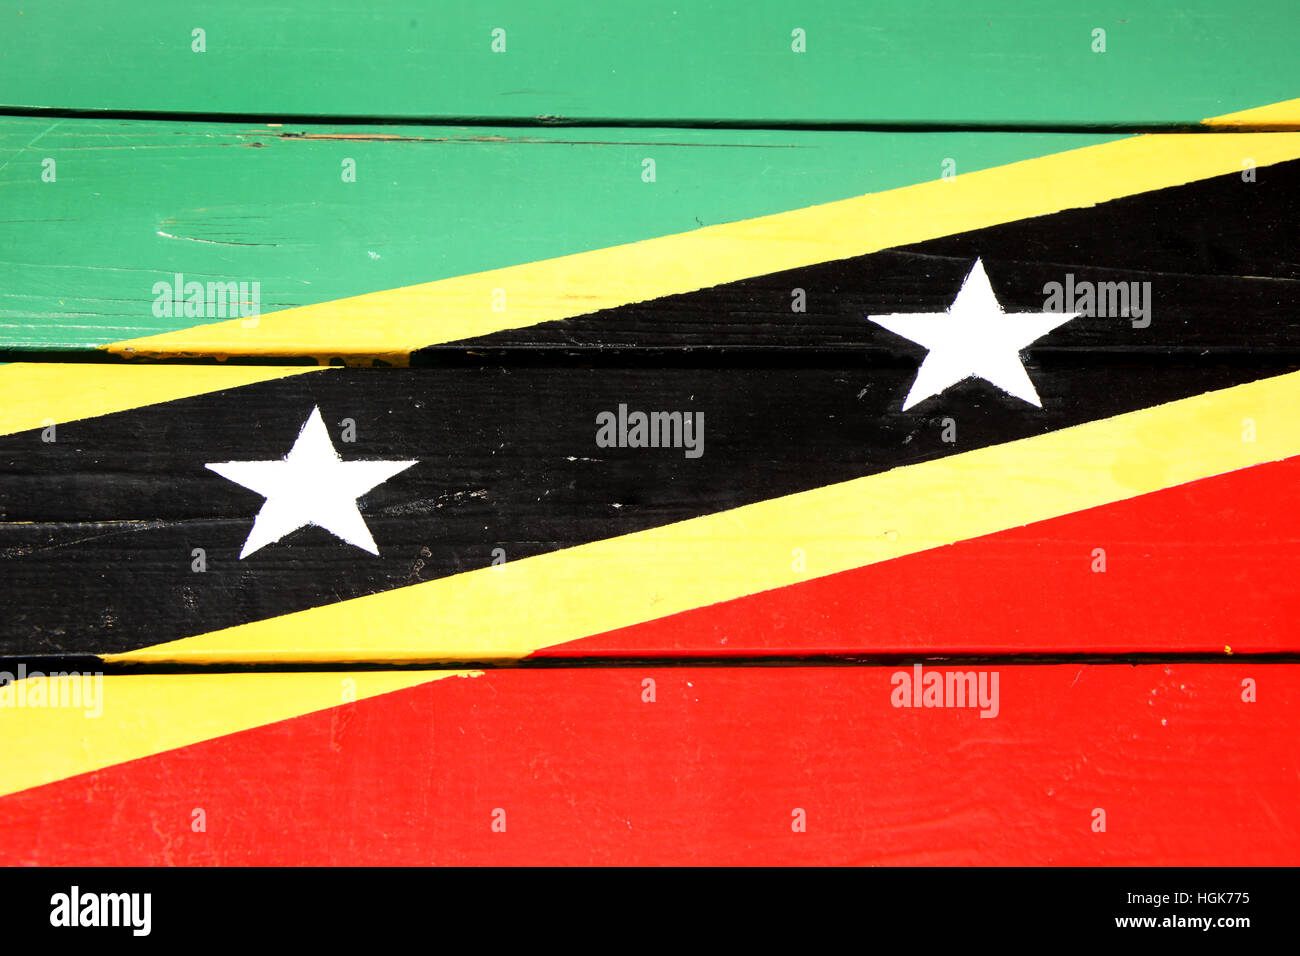 Flag of St Kitts & Nevis painted on wooden planks, in bright colors of red, yellow, green & black. Bassterre, Caribbean. Stock Photo